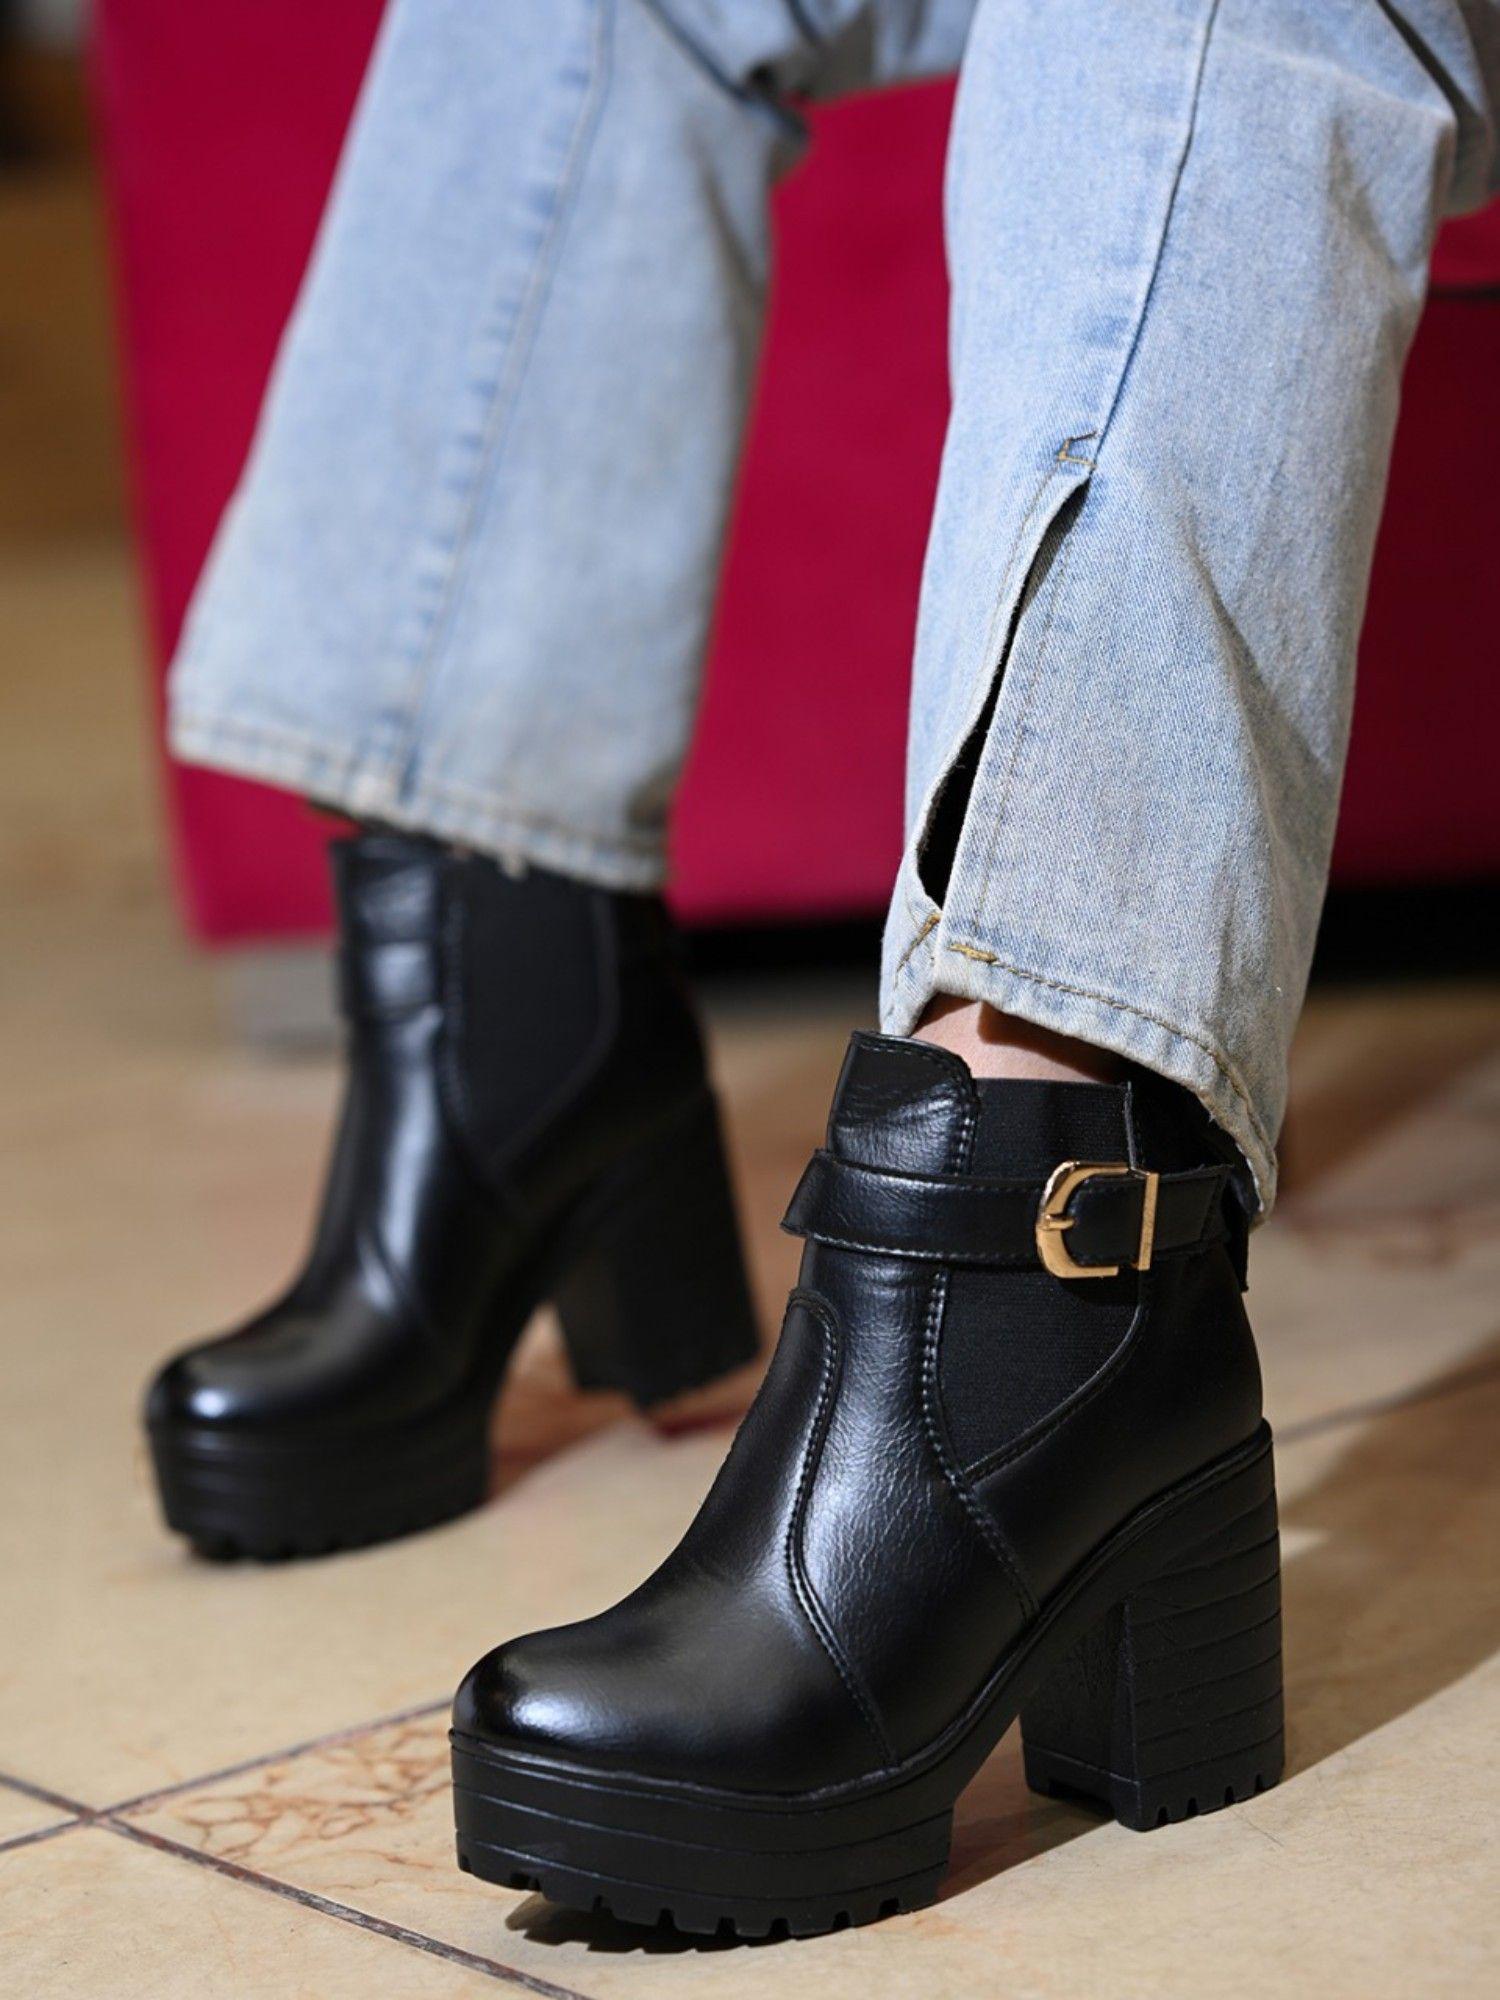 black platform heeled boots with buckles for girls